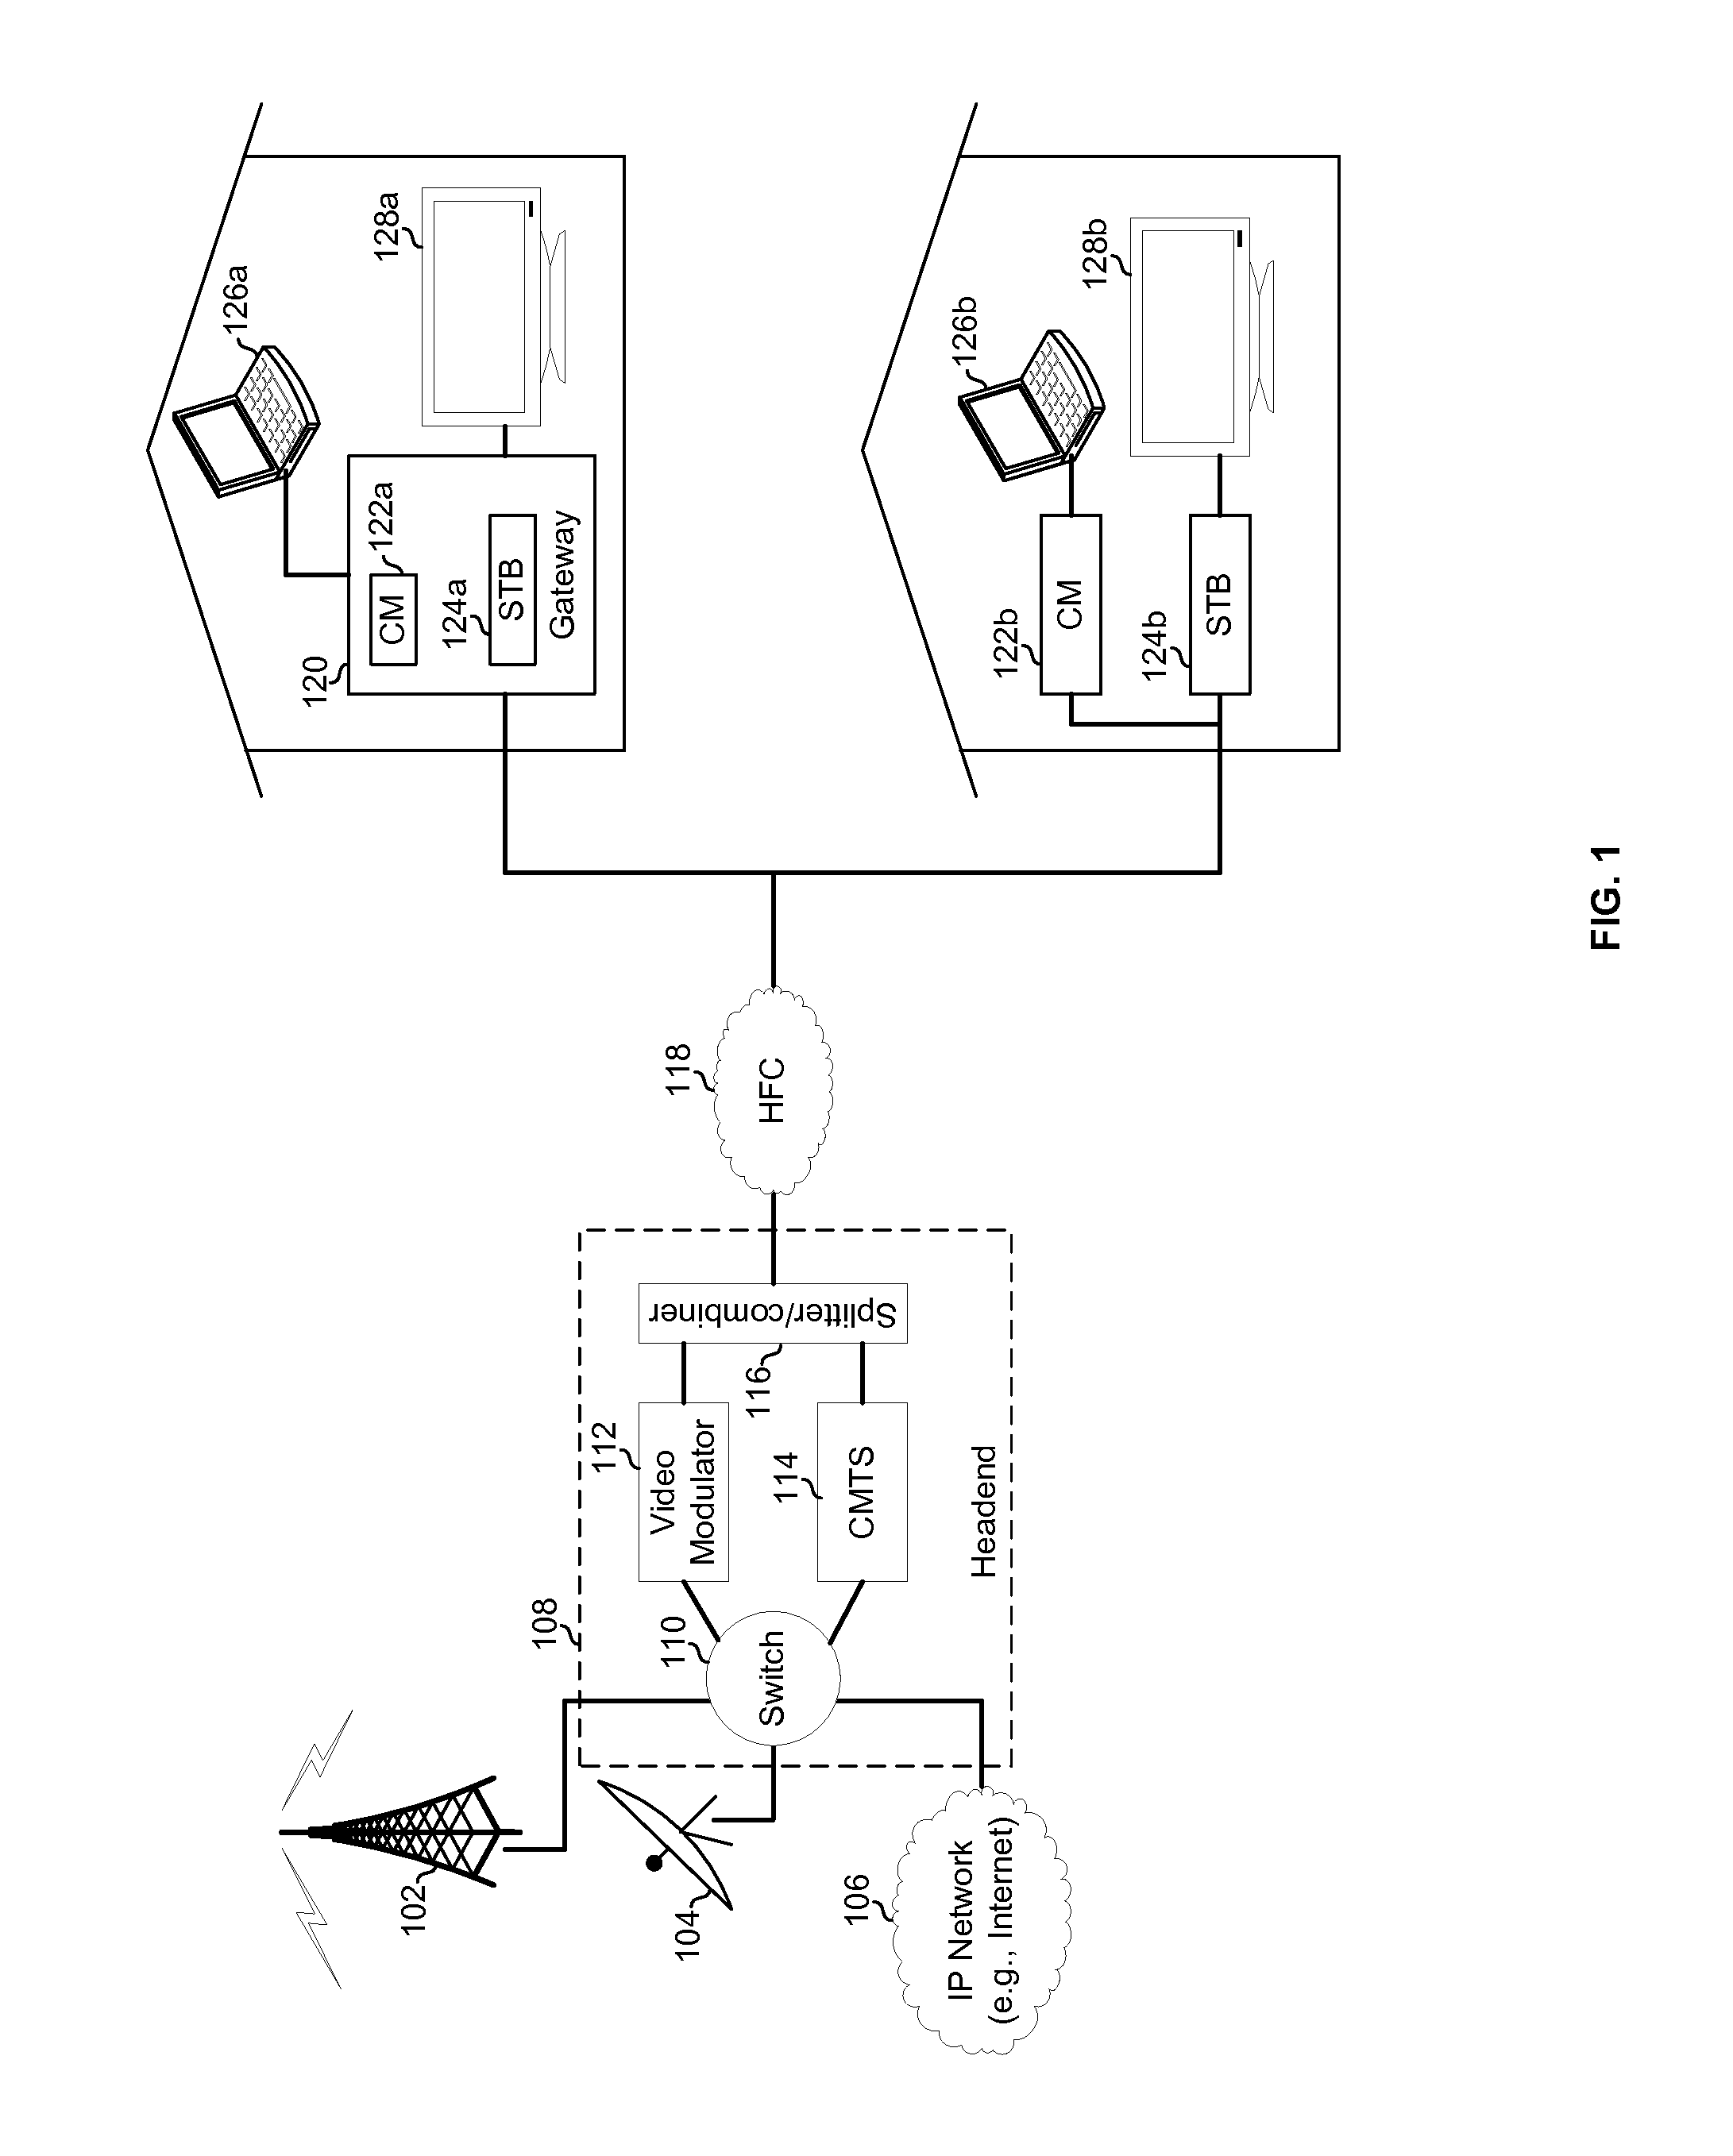 Method and system for server-side message handling in a low-power wide area network